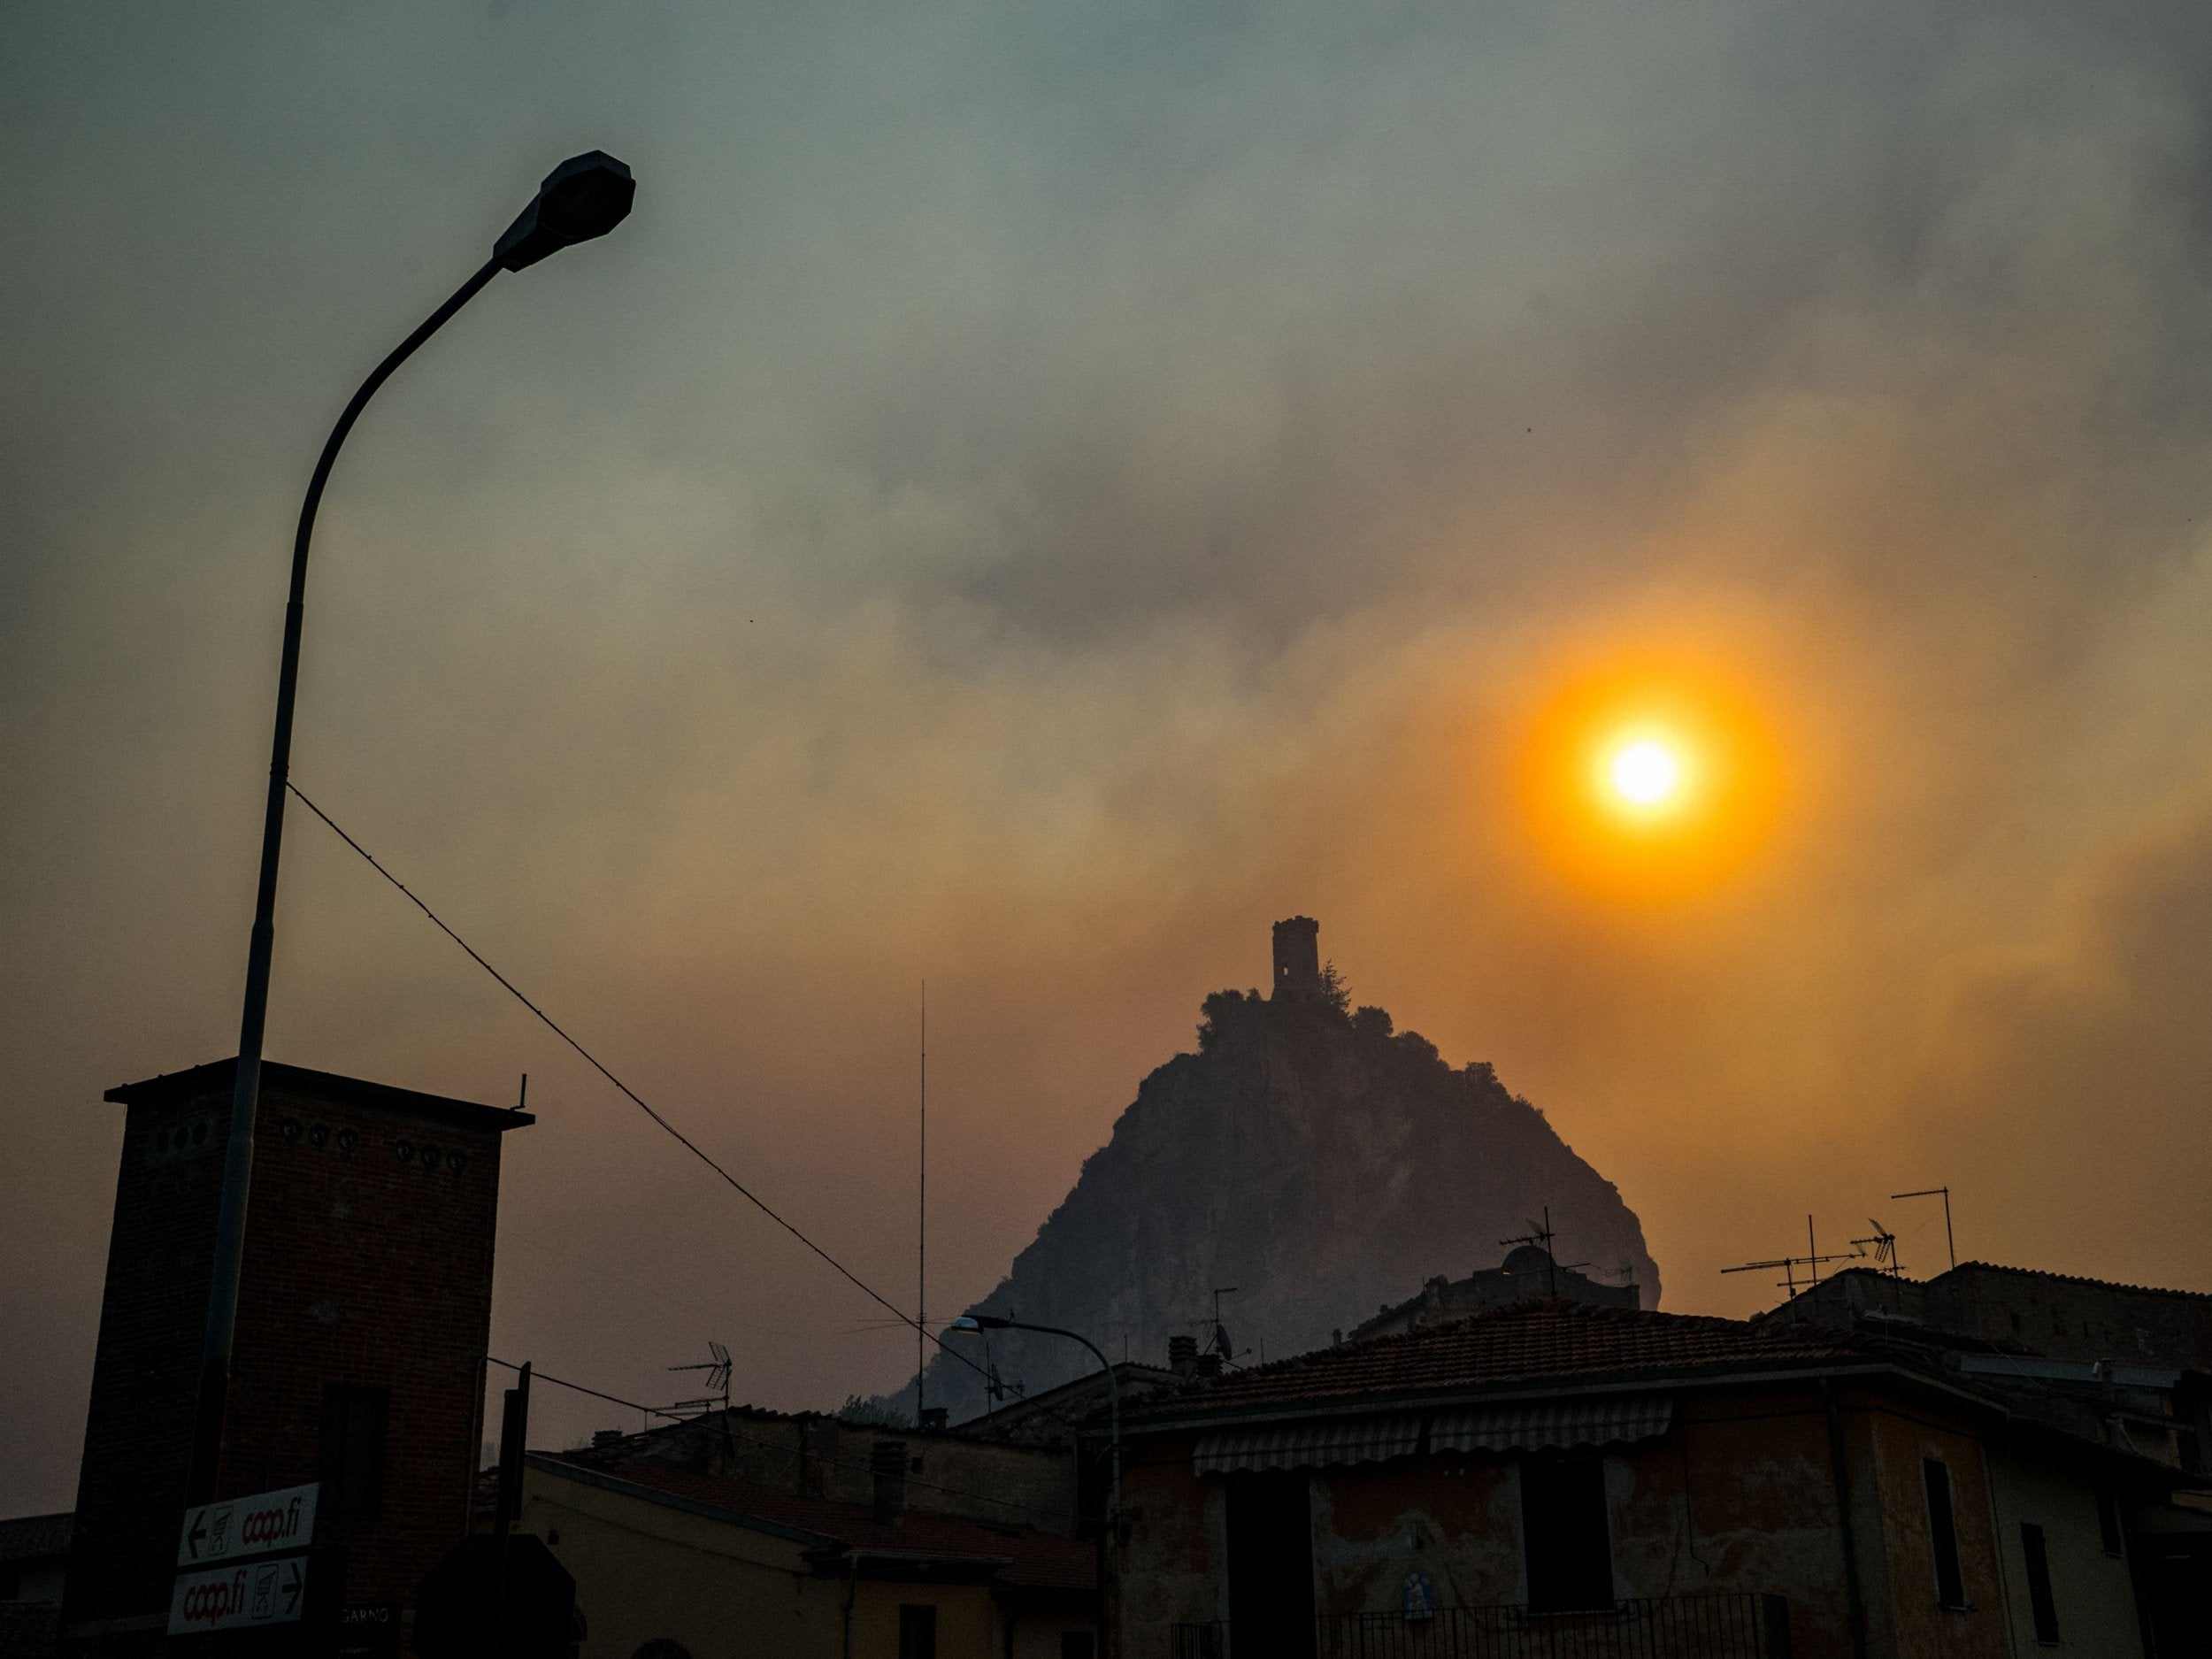 Smoke signal: arsonists have been blamed for the forest fires around Pisa